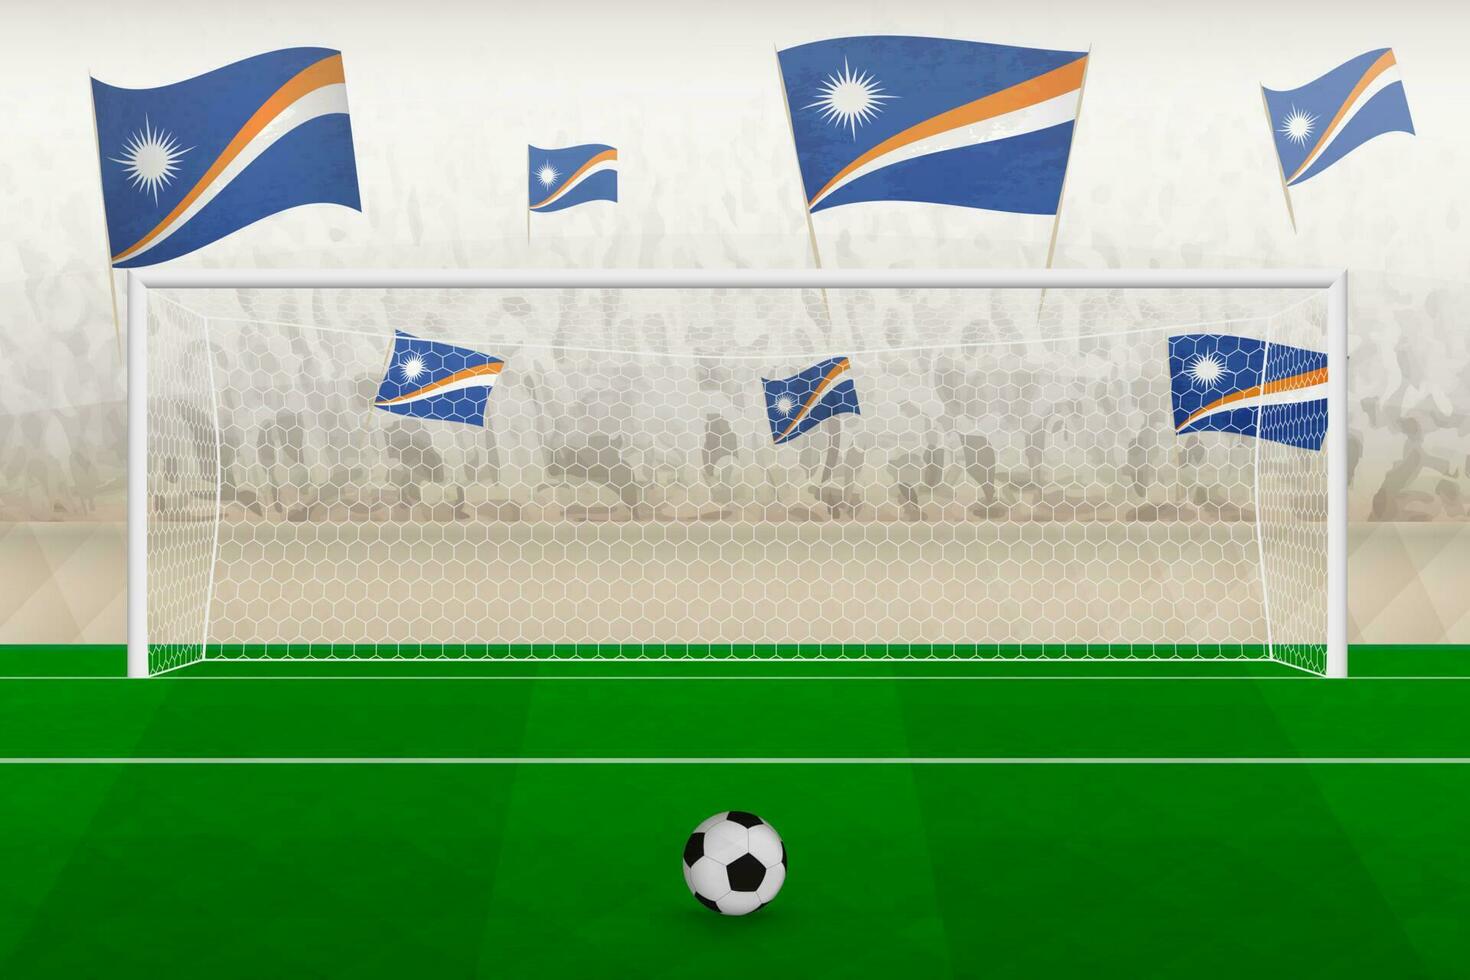 Marshall Islands football team fans with flags of Marshall Islands cheering on stadium, penalty kick concept in a soccer match. vector